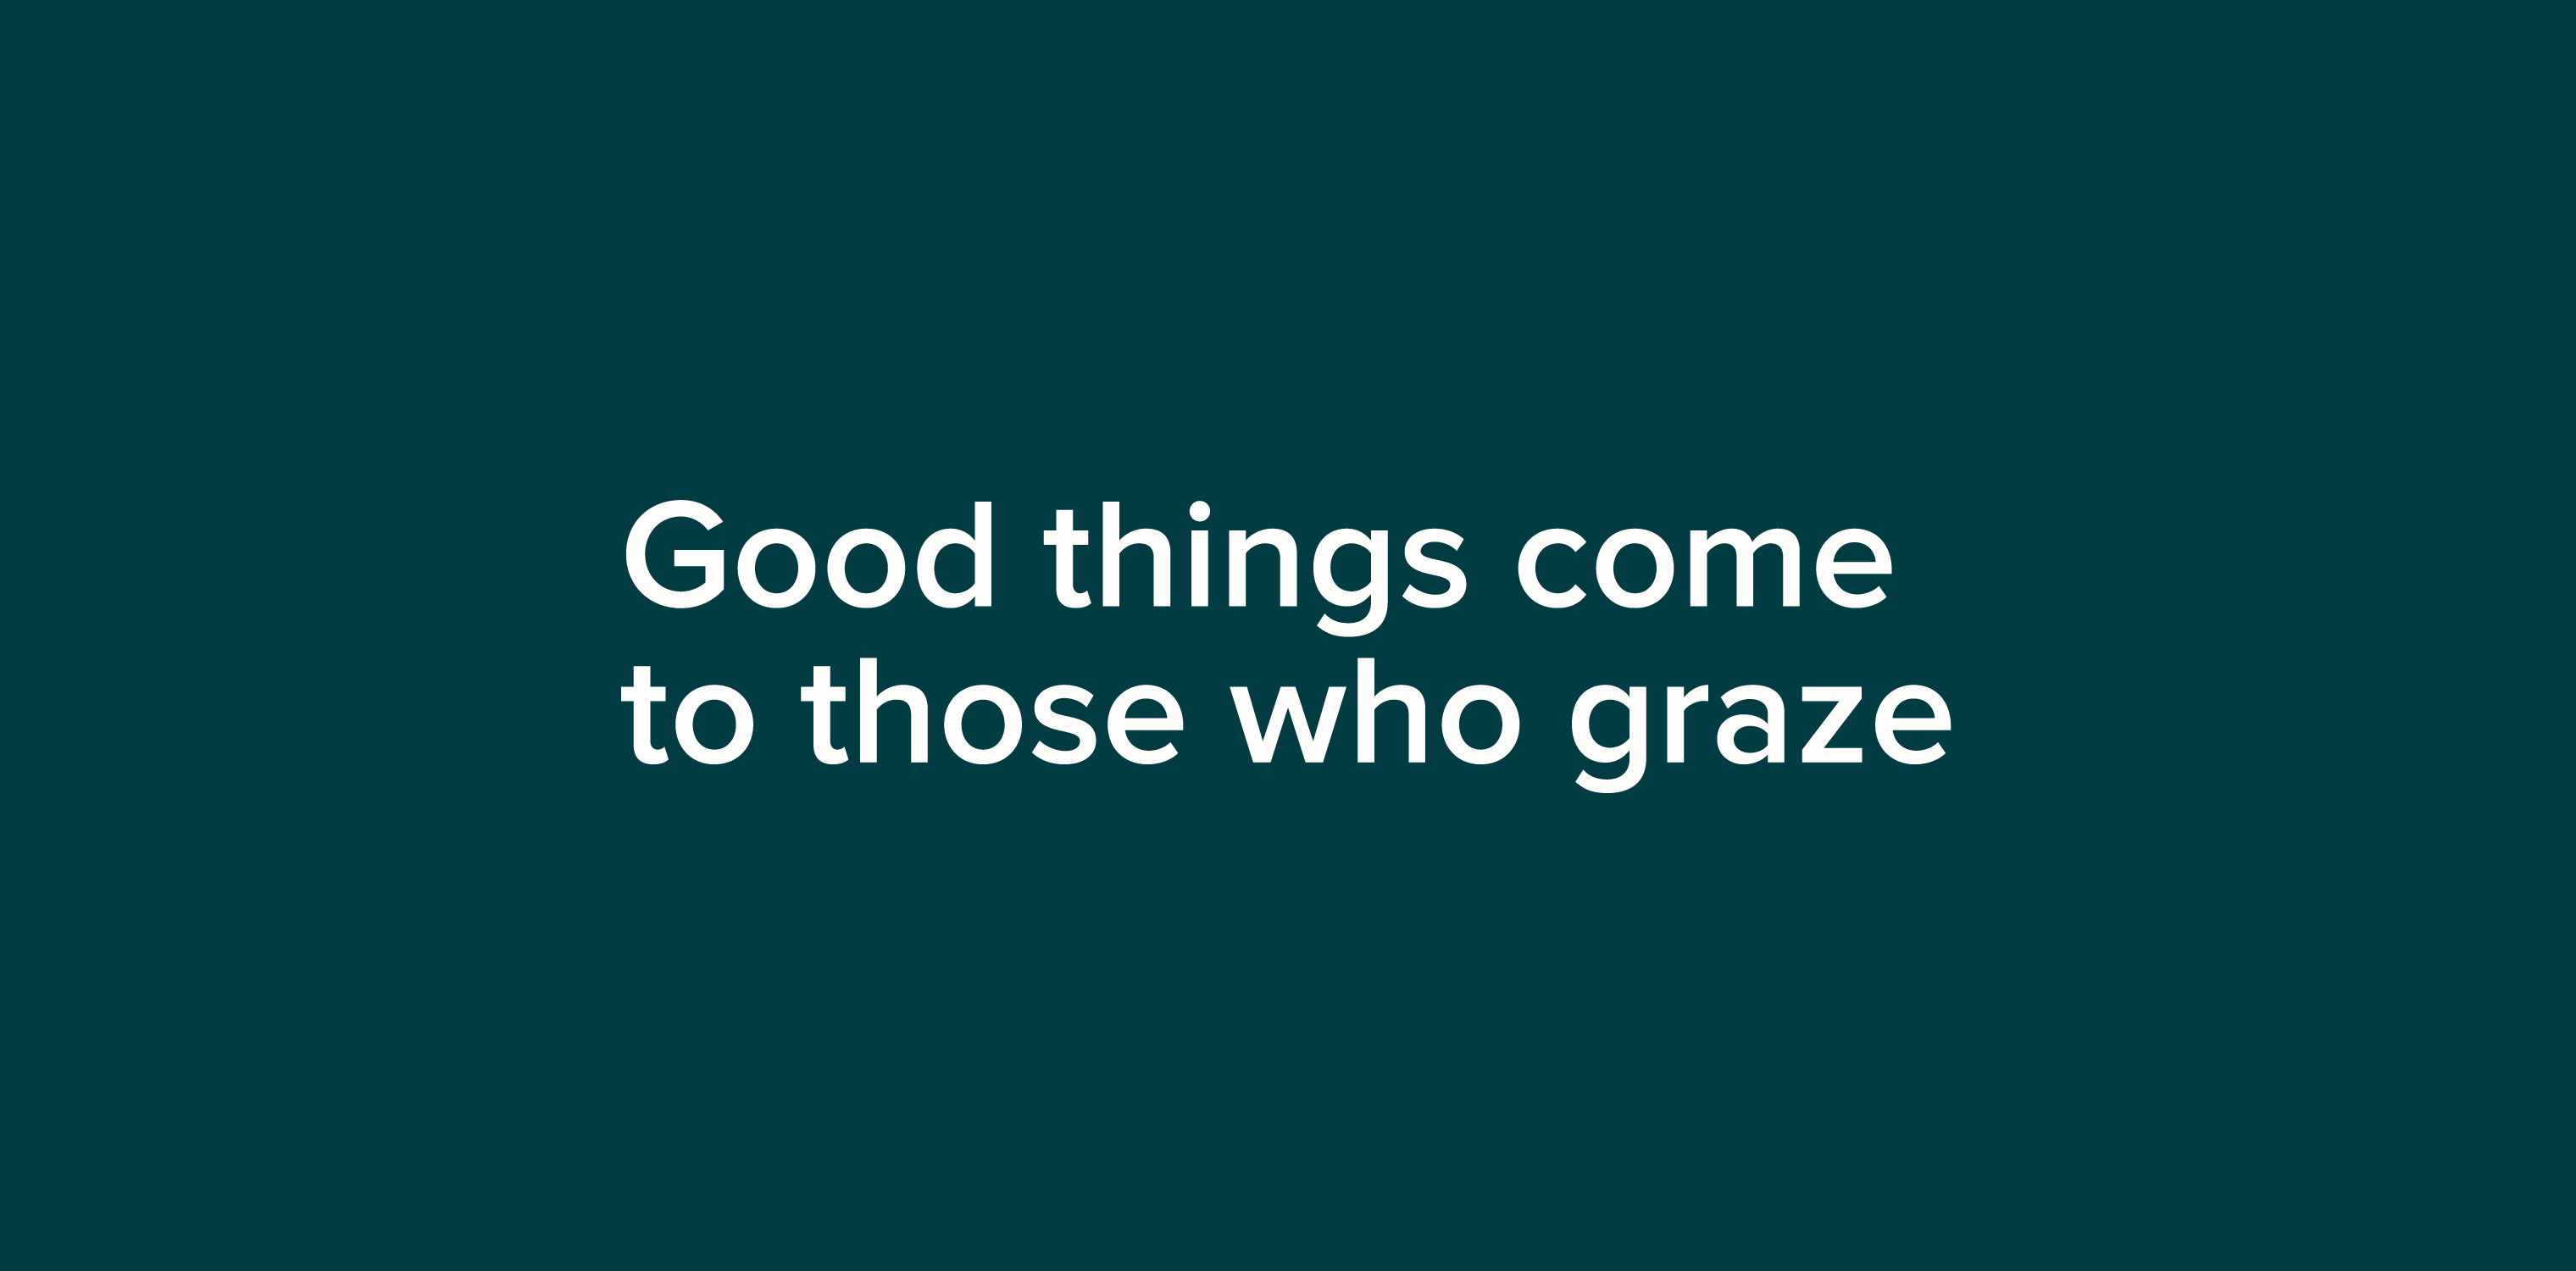 White 'Good things come to those who graze' on a teal background to reinforce the Grazy brand promise